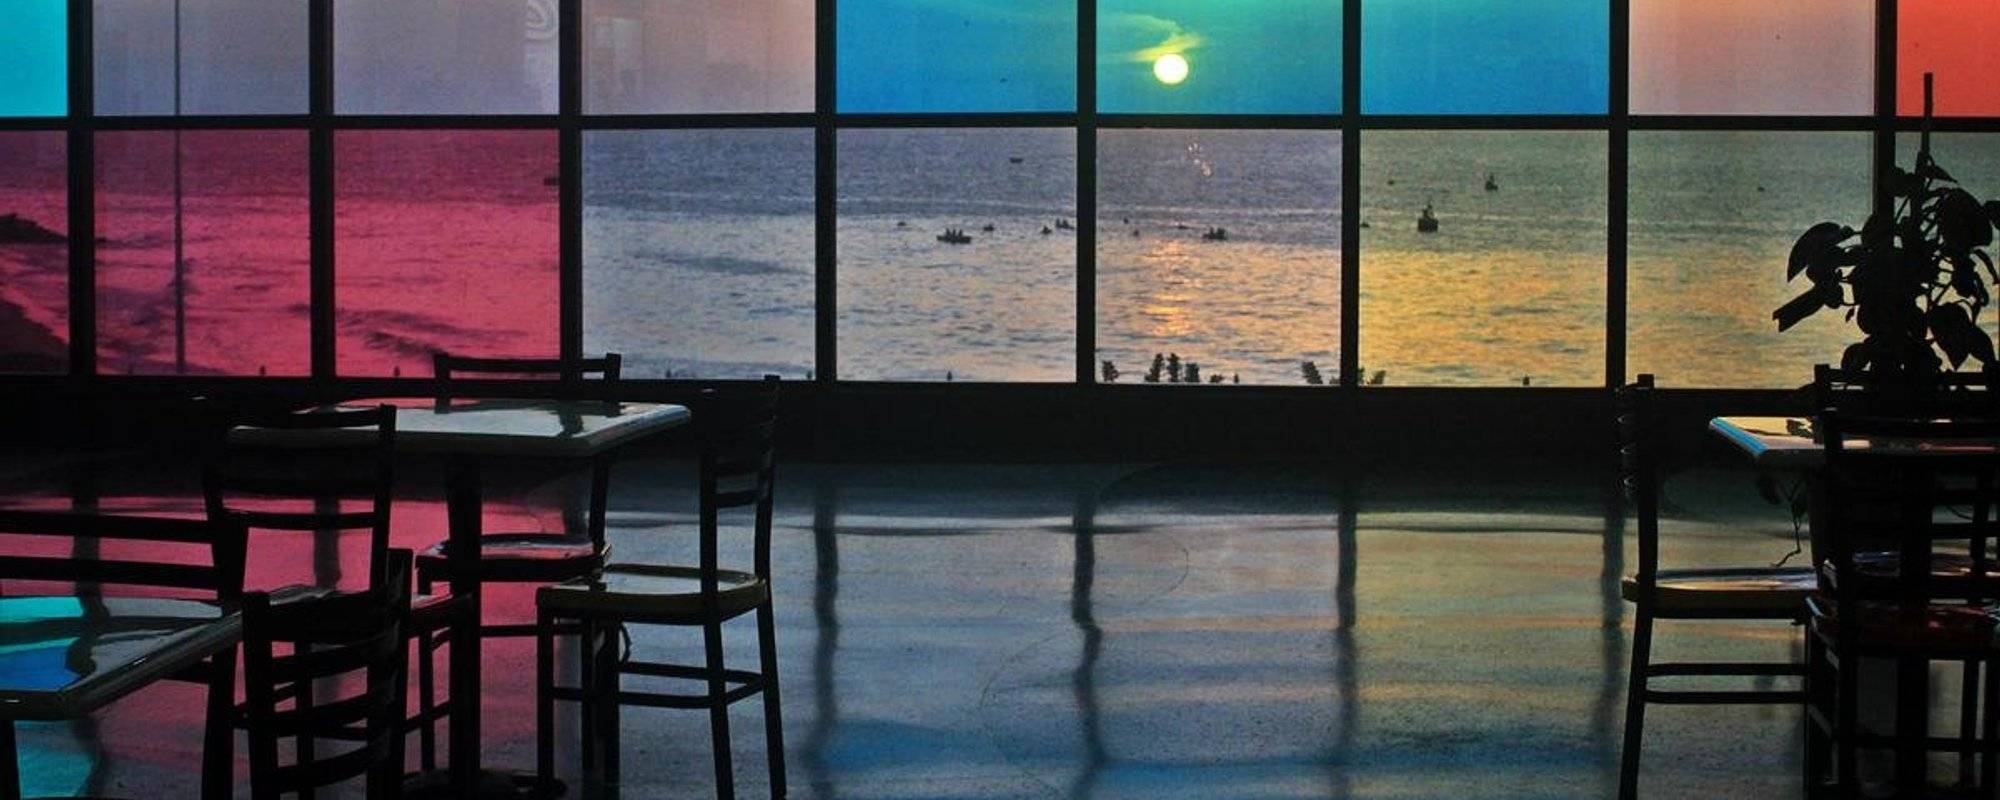 The stained glass window that turns sunsets into works of art